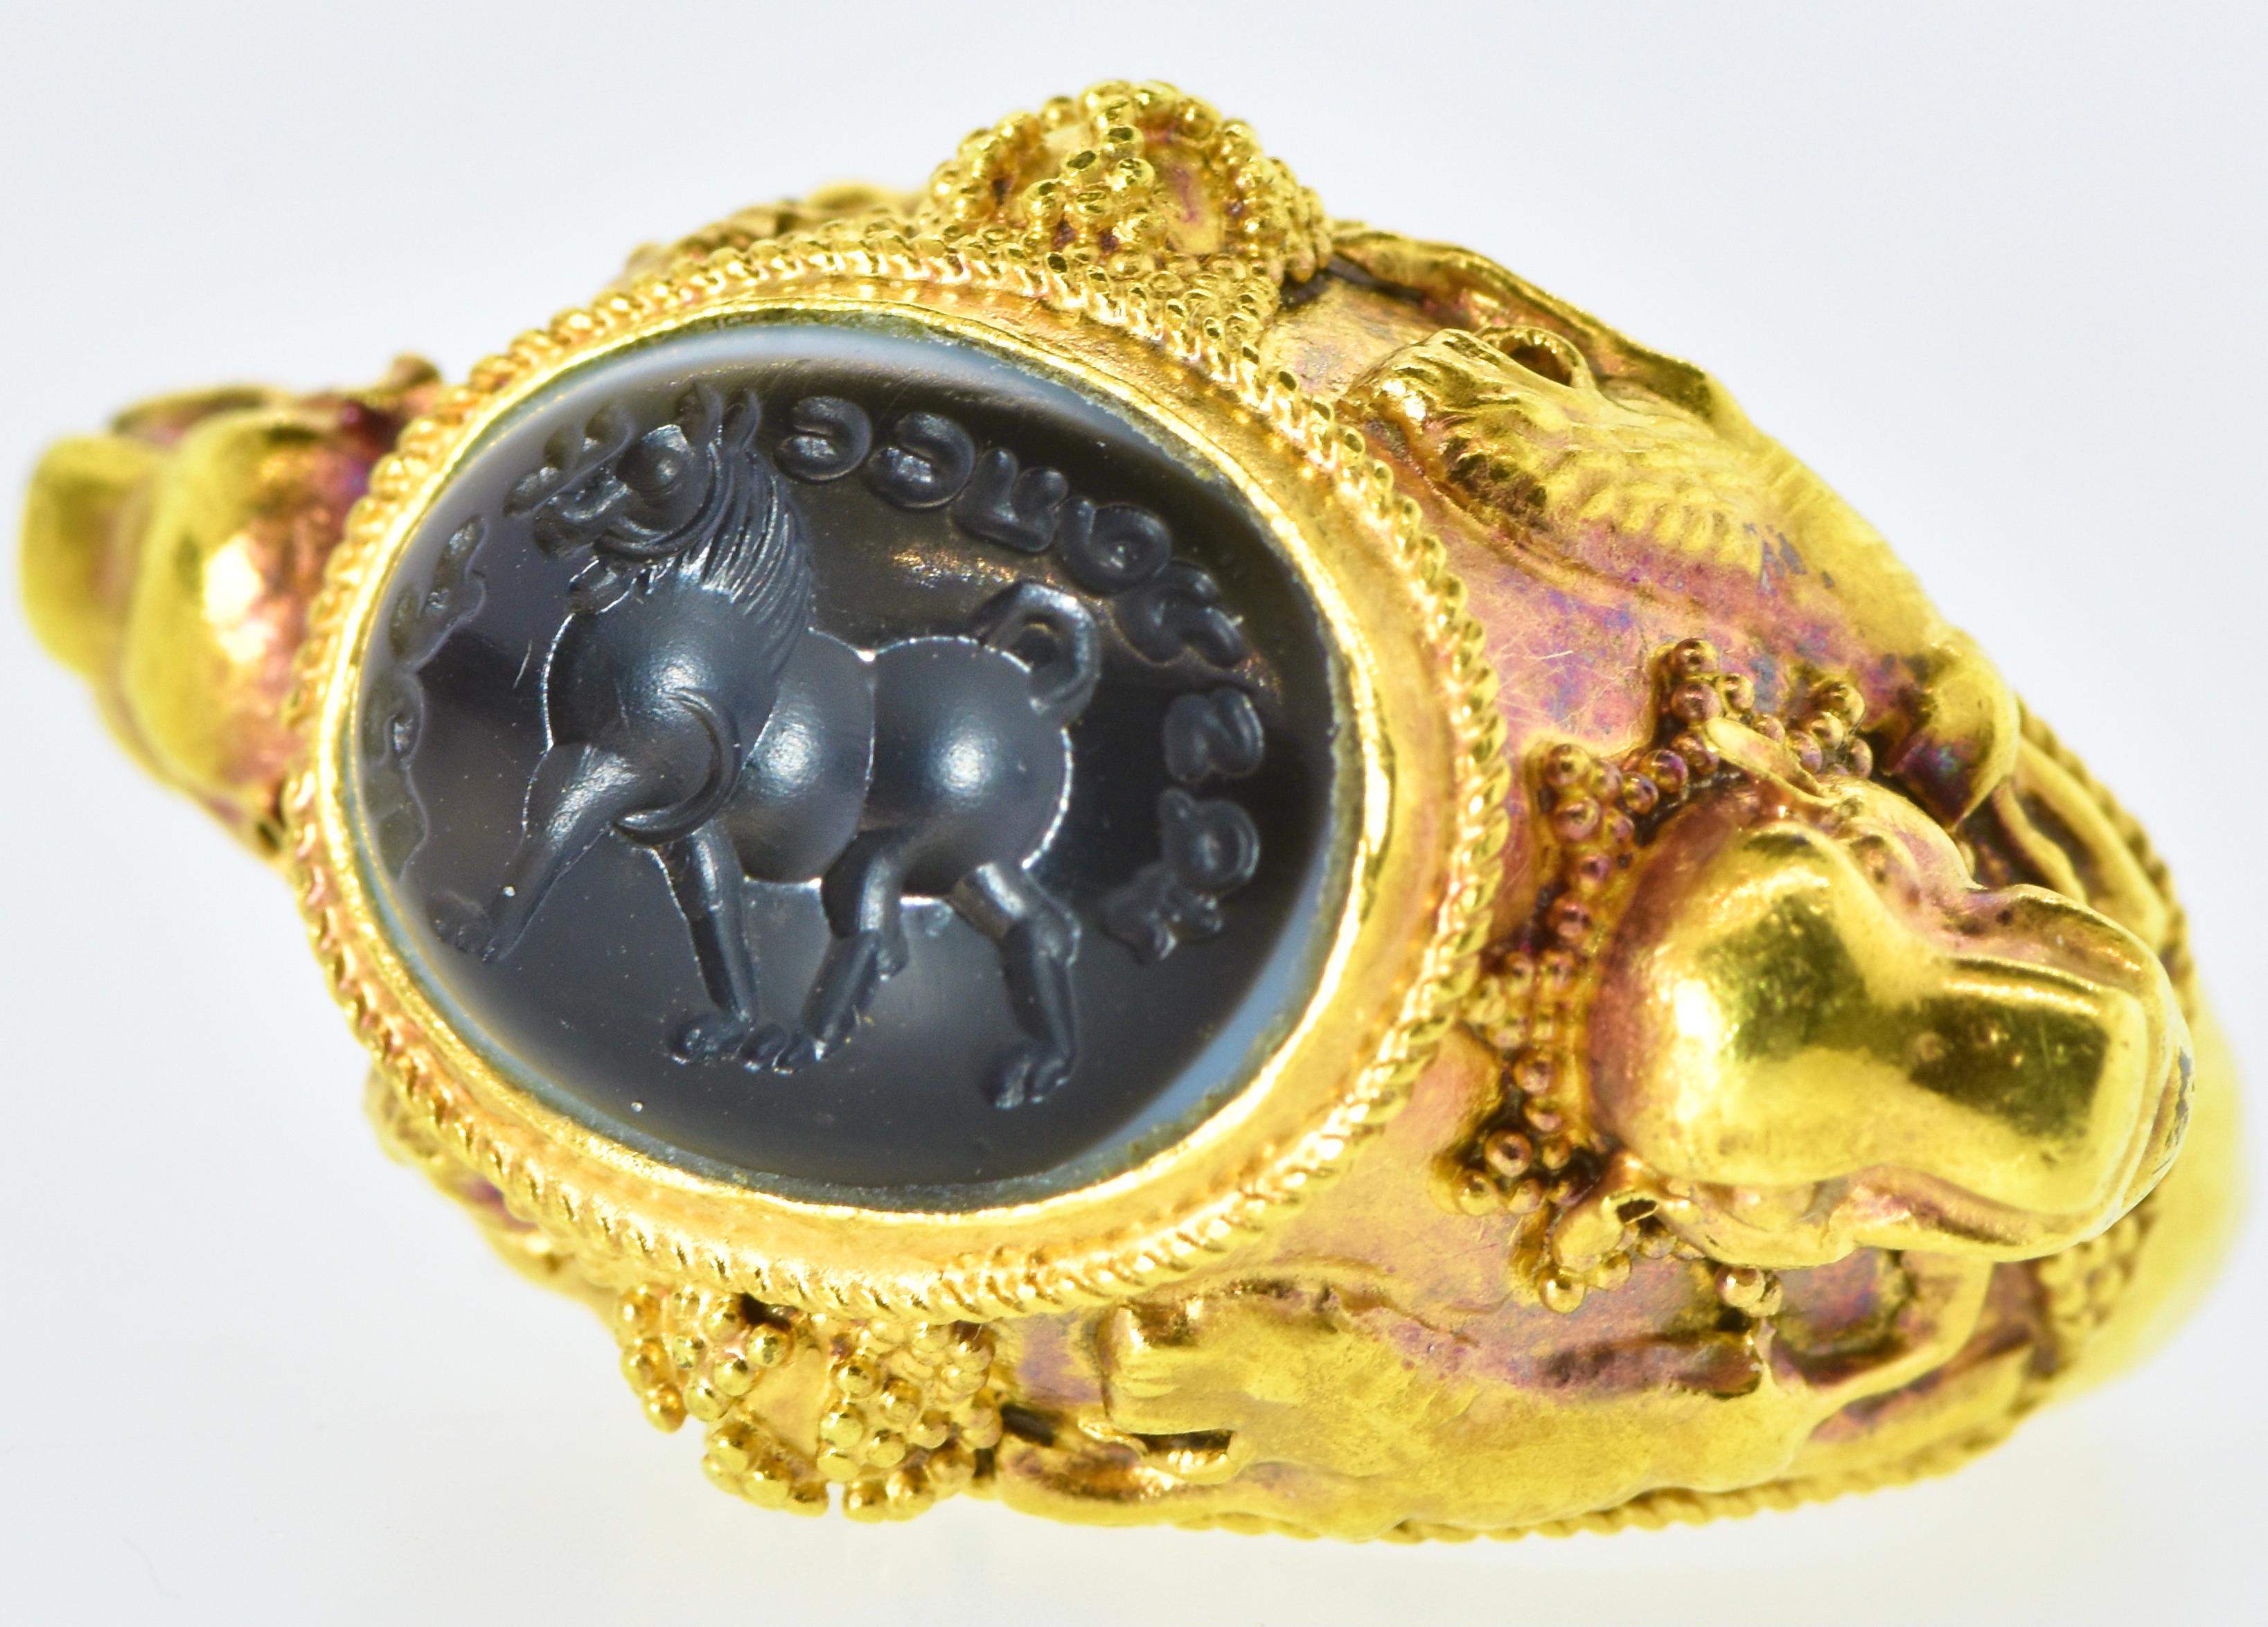 Victorian Antique Banded Agate Intaglio Within a Rare 22k Ring, C. 1800